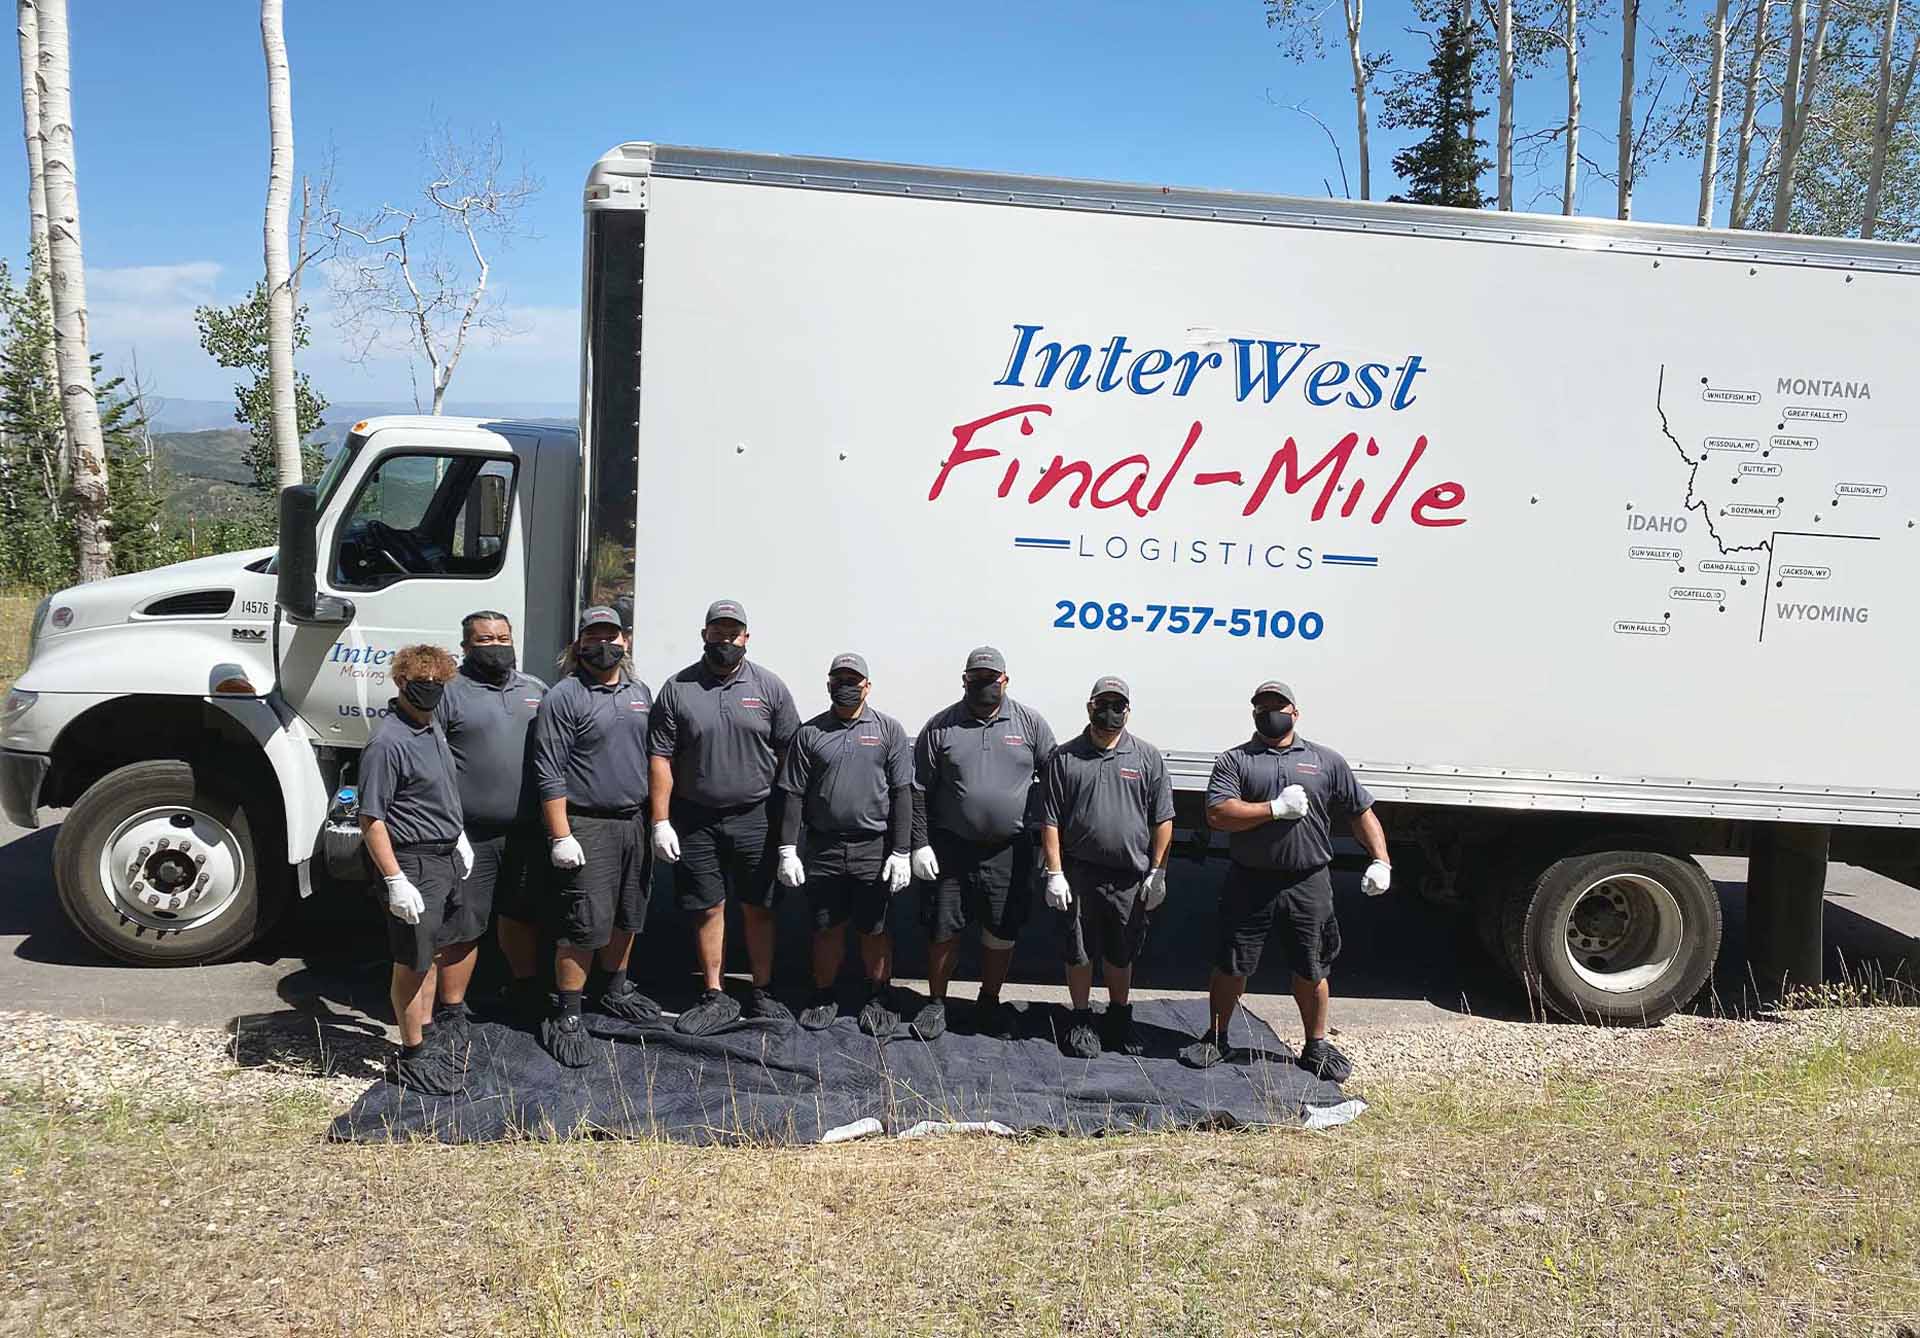 White Glove Delivery Team in front of truck